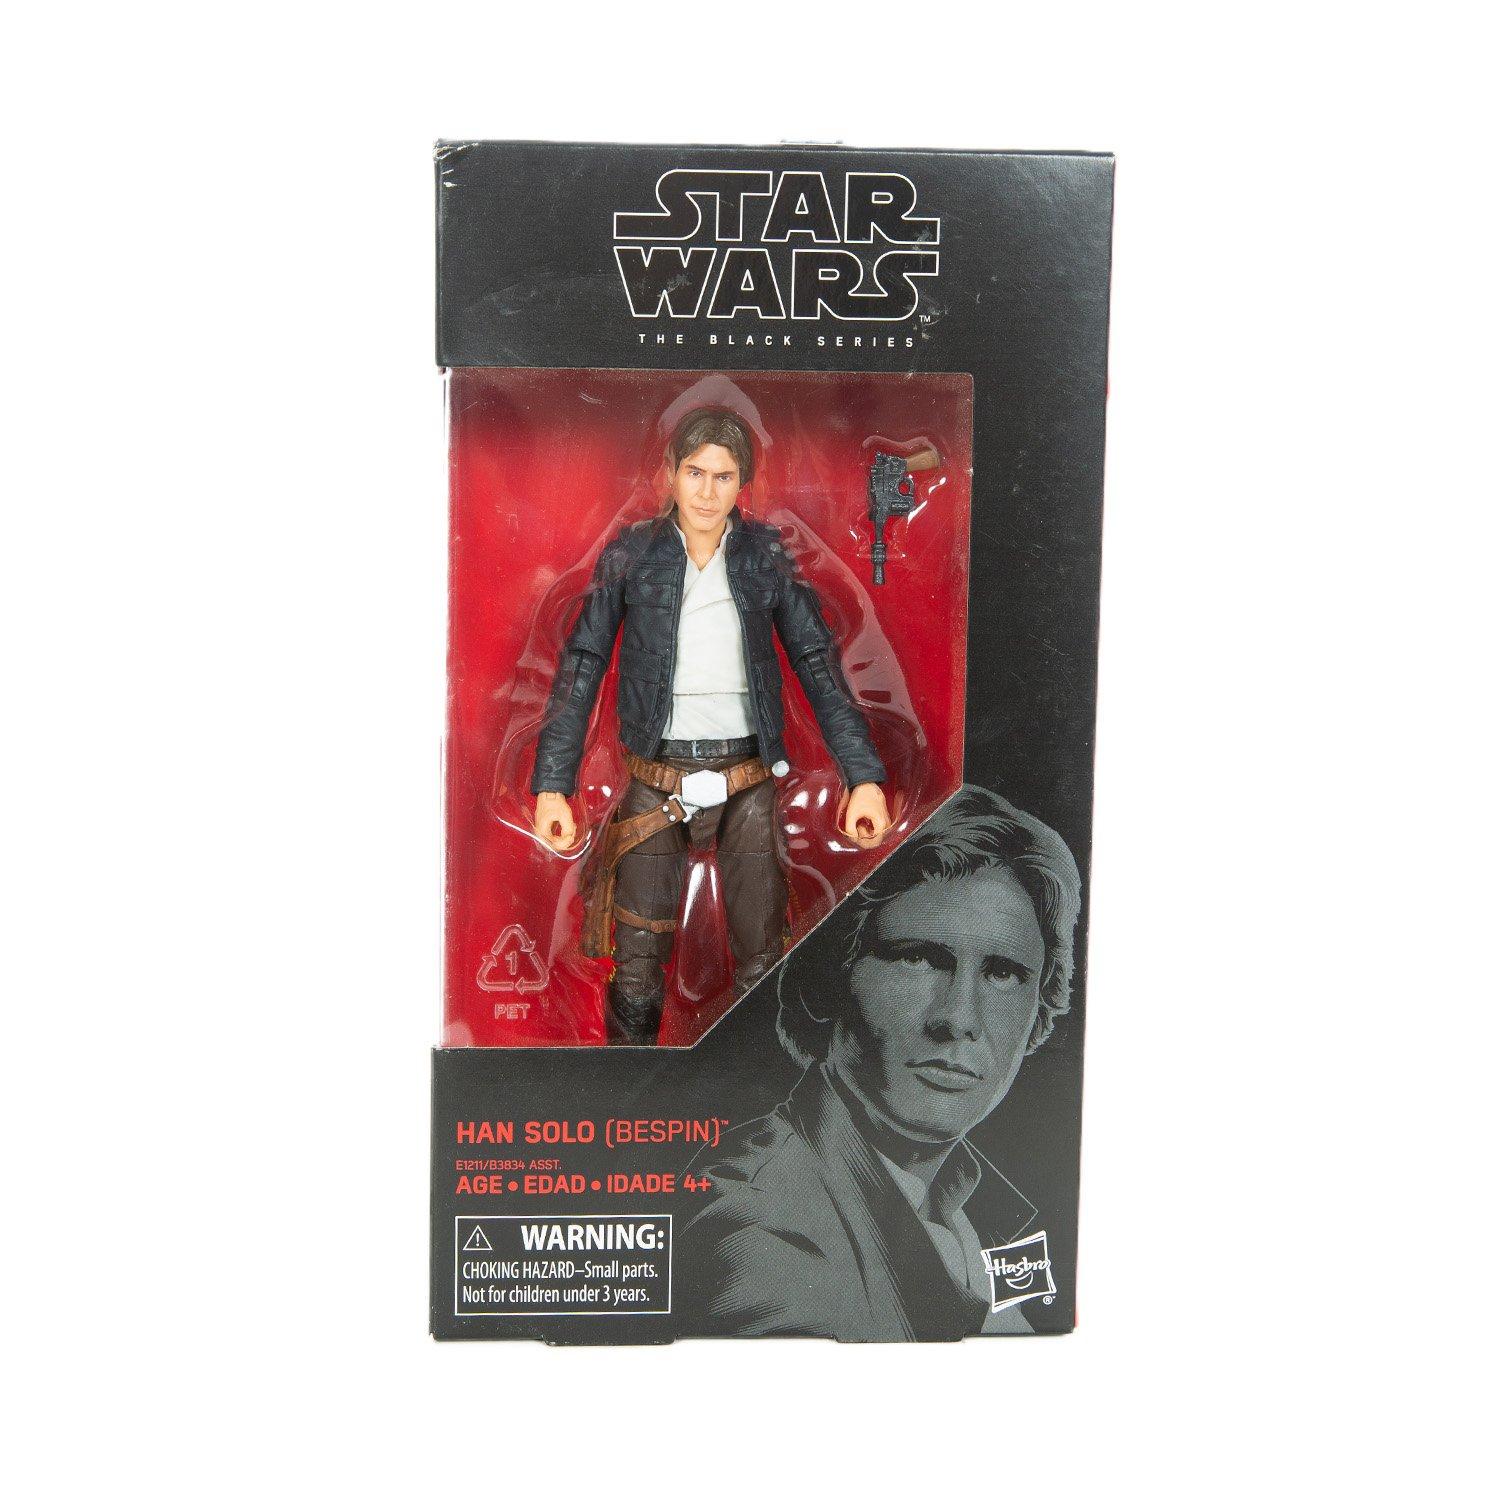 Hasbro Star Wars: The Black Series Han Solo Bespin Action Figure